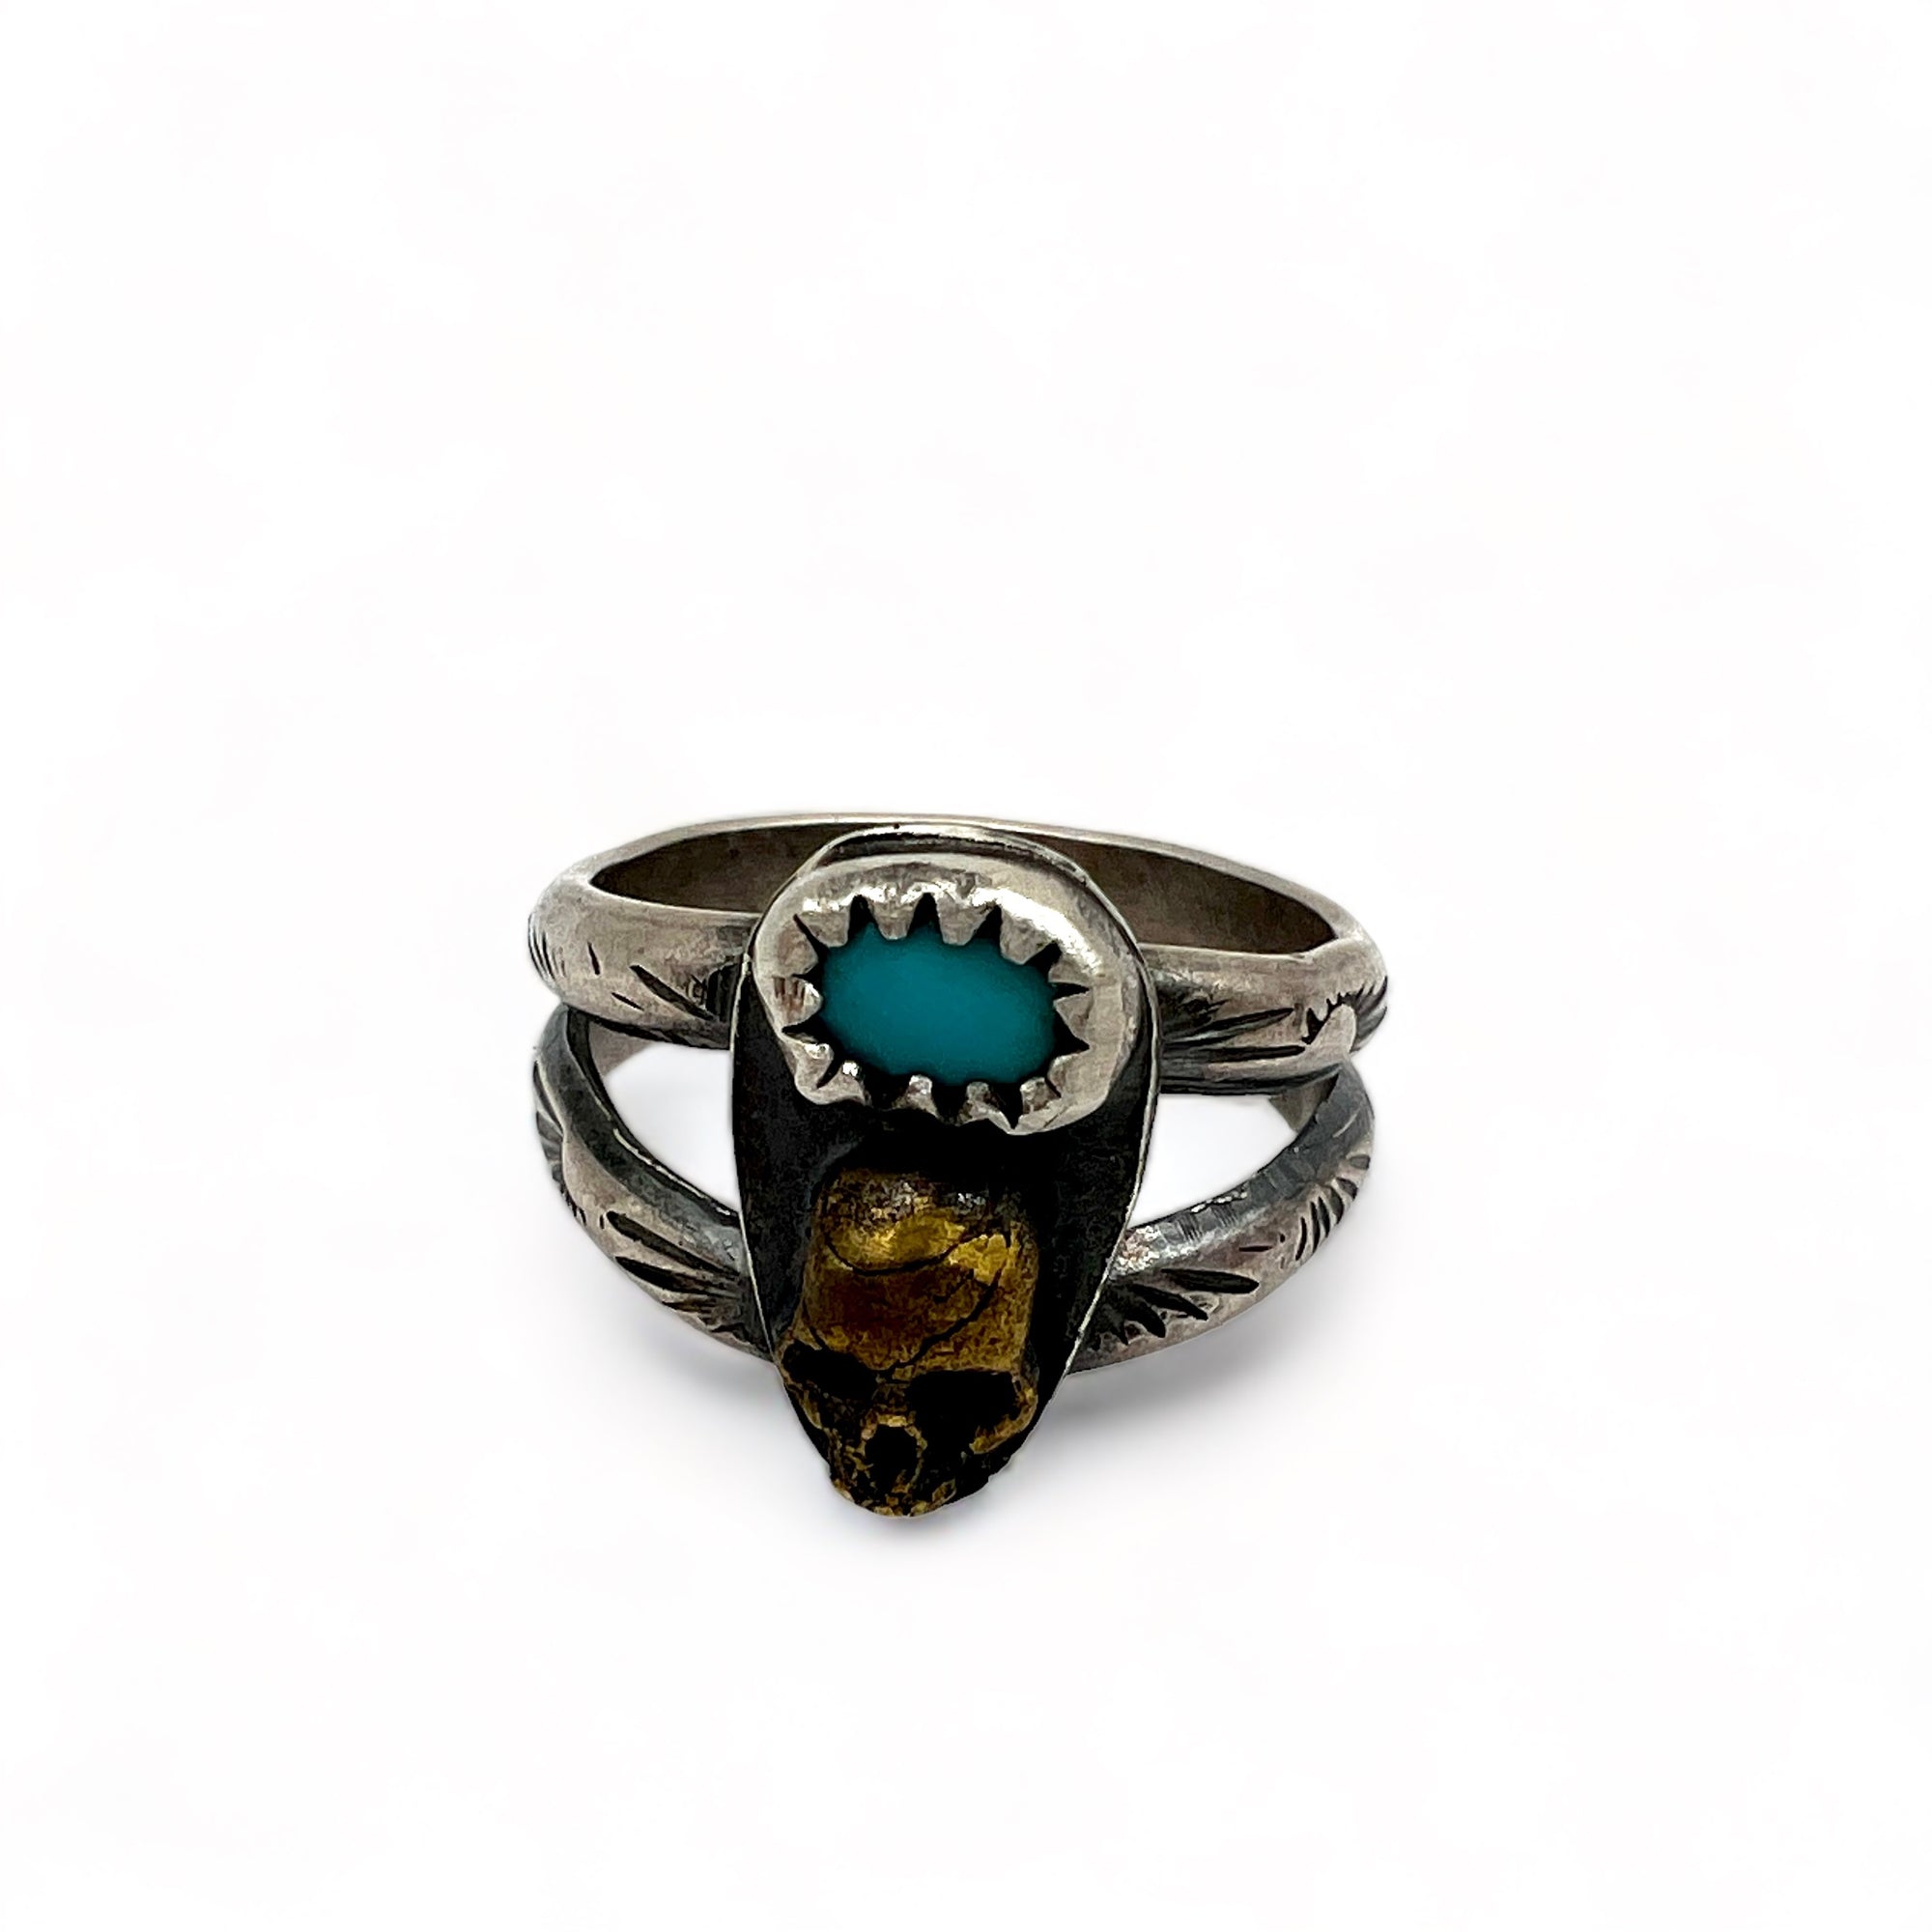 Turquoise Skull Baby Ring size 4.75